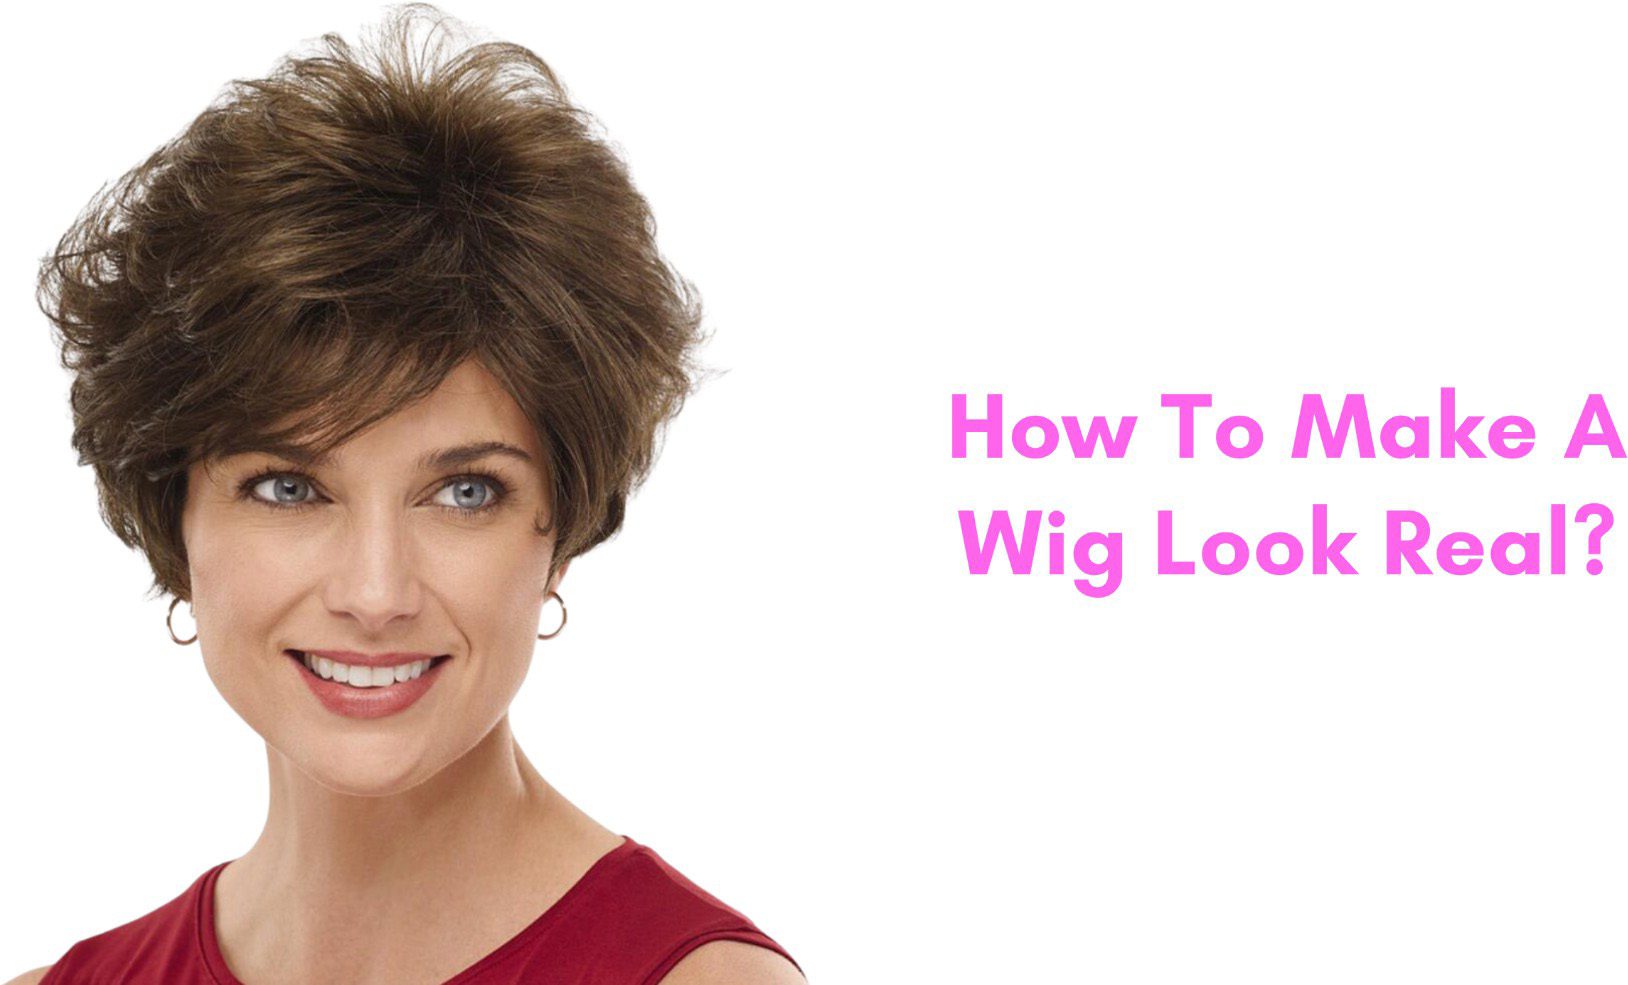 How To Make A Wig Look Real? | Paula Young Blog